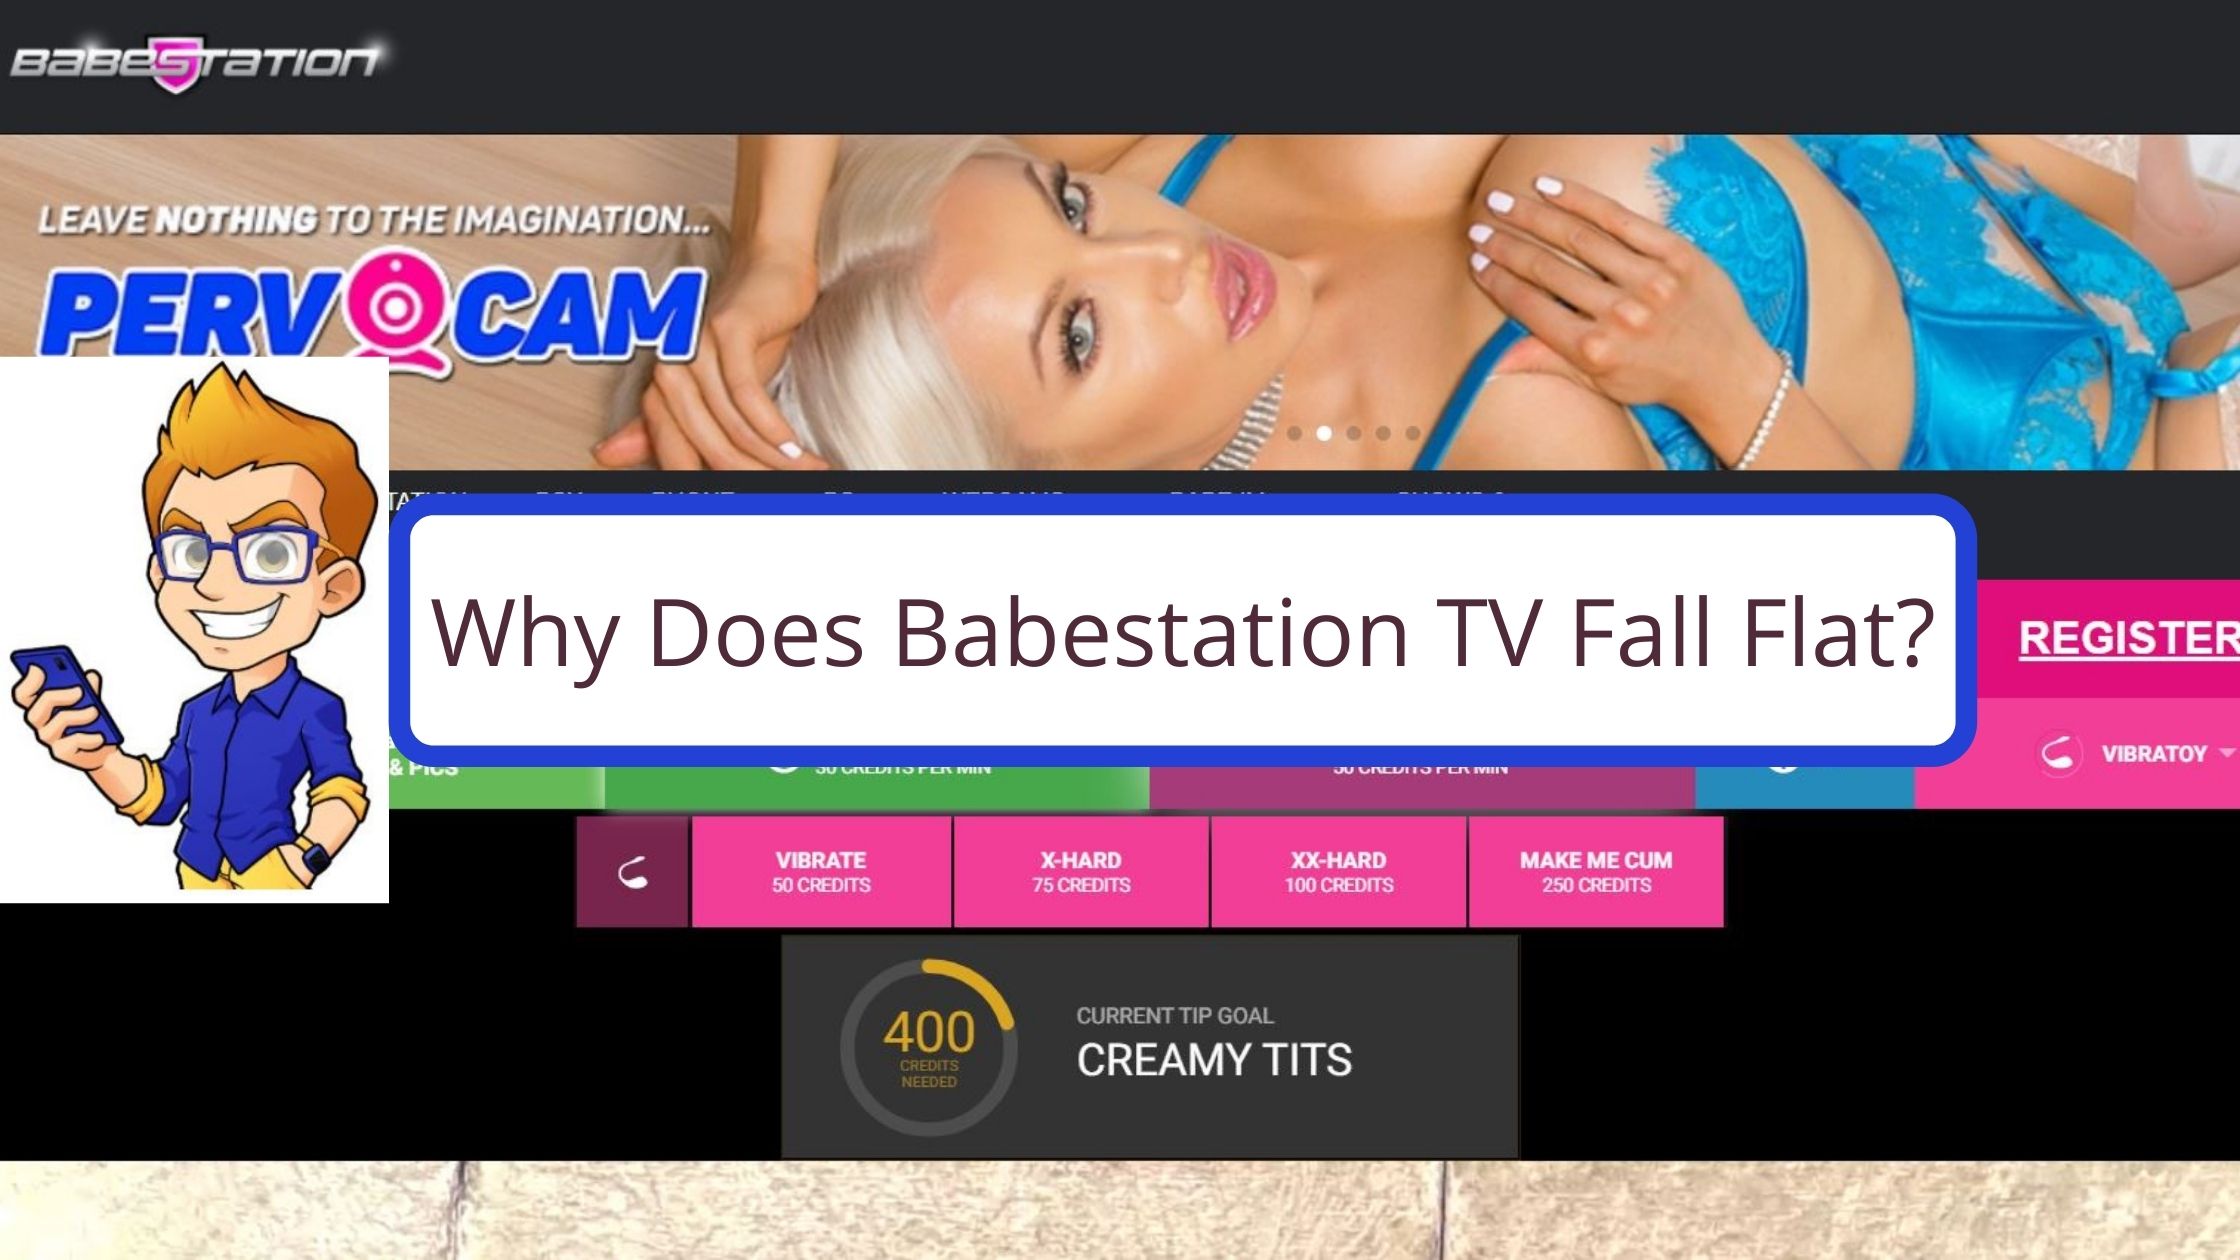 dipto chatterjee recommends Babe Station Tv